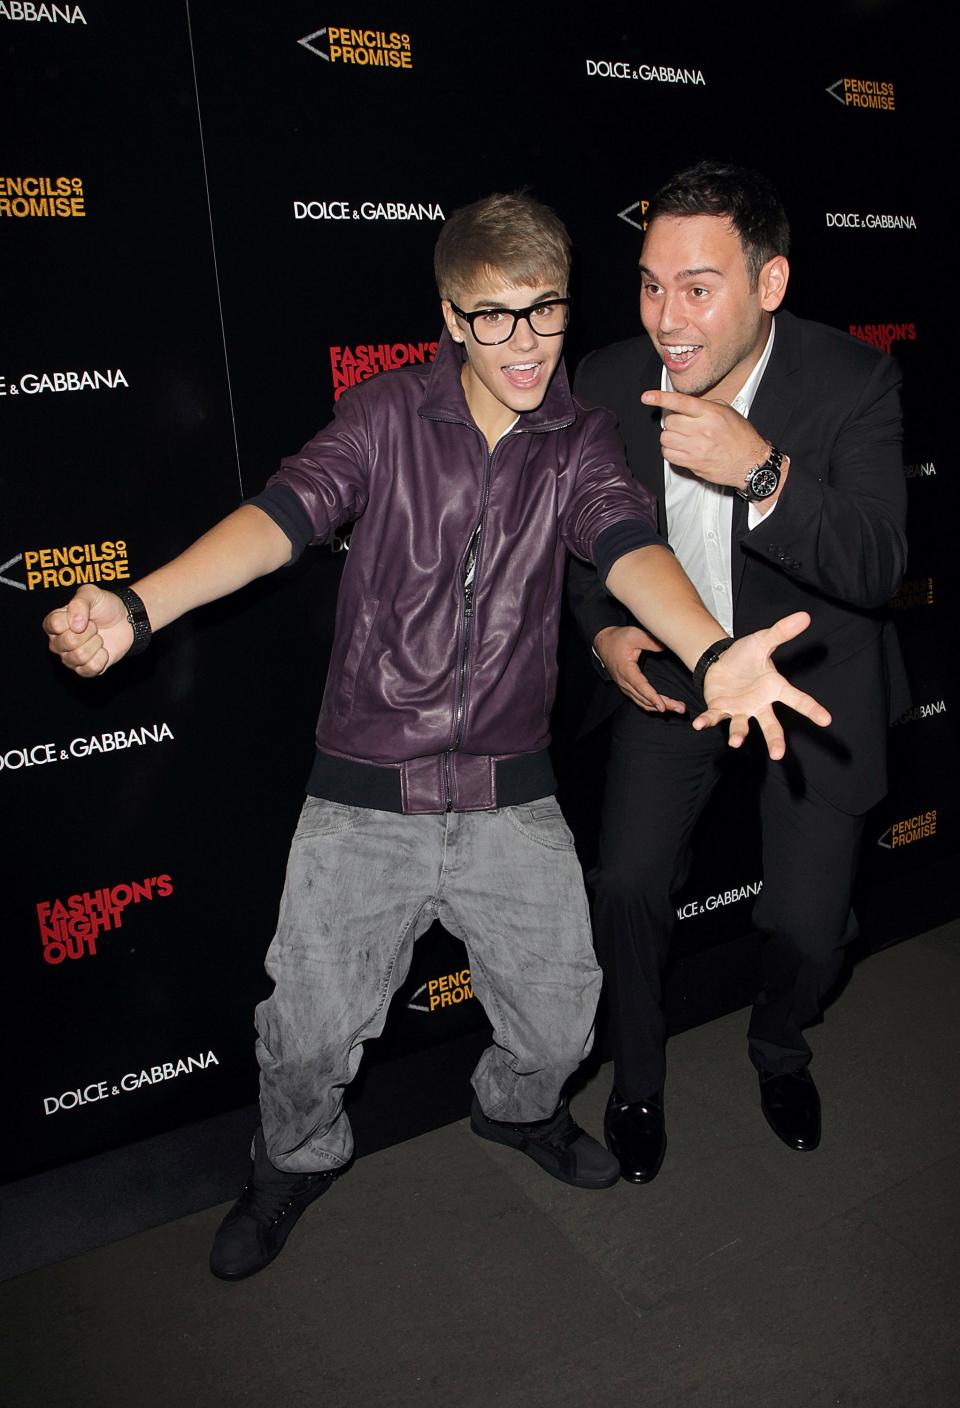 Justin Bieber and Scooter Braun attend the Fashion Night Out Dolce & Gabbana on Sept. 8, 2011, in New York. Braun discovered Bieber as a 12-year-old uploading singing videos to YouTube.